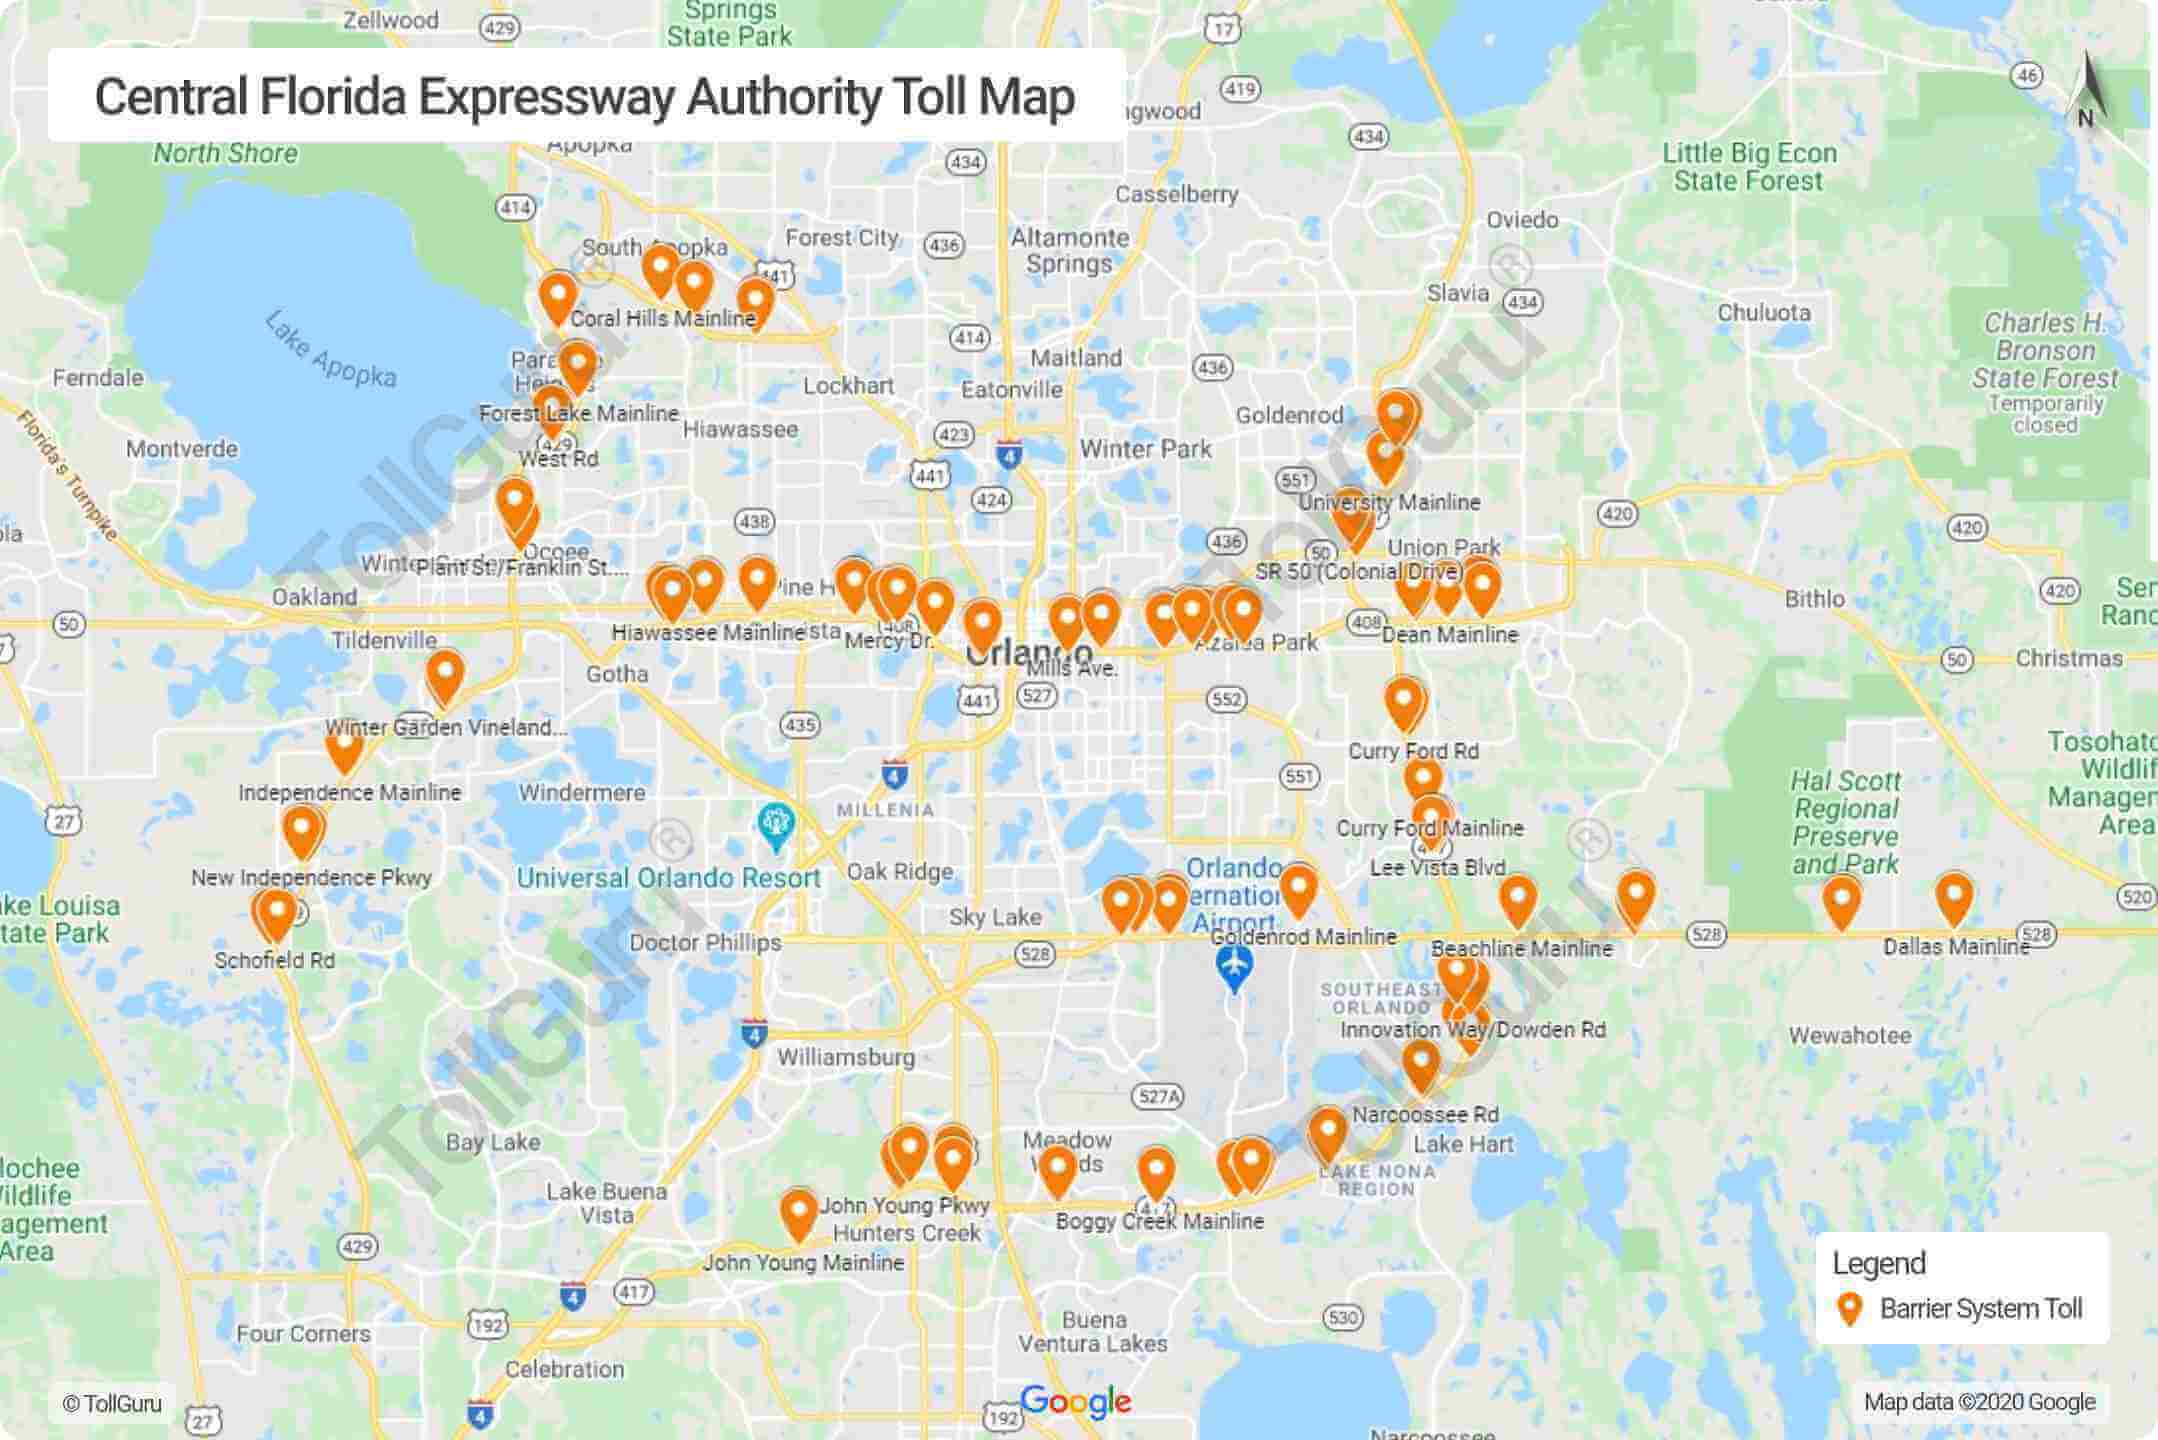 Central Florida Expressway Authority toll booth locations of Florida 408, Florida 414, Florida 417, Florida 429, Florida 528